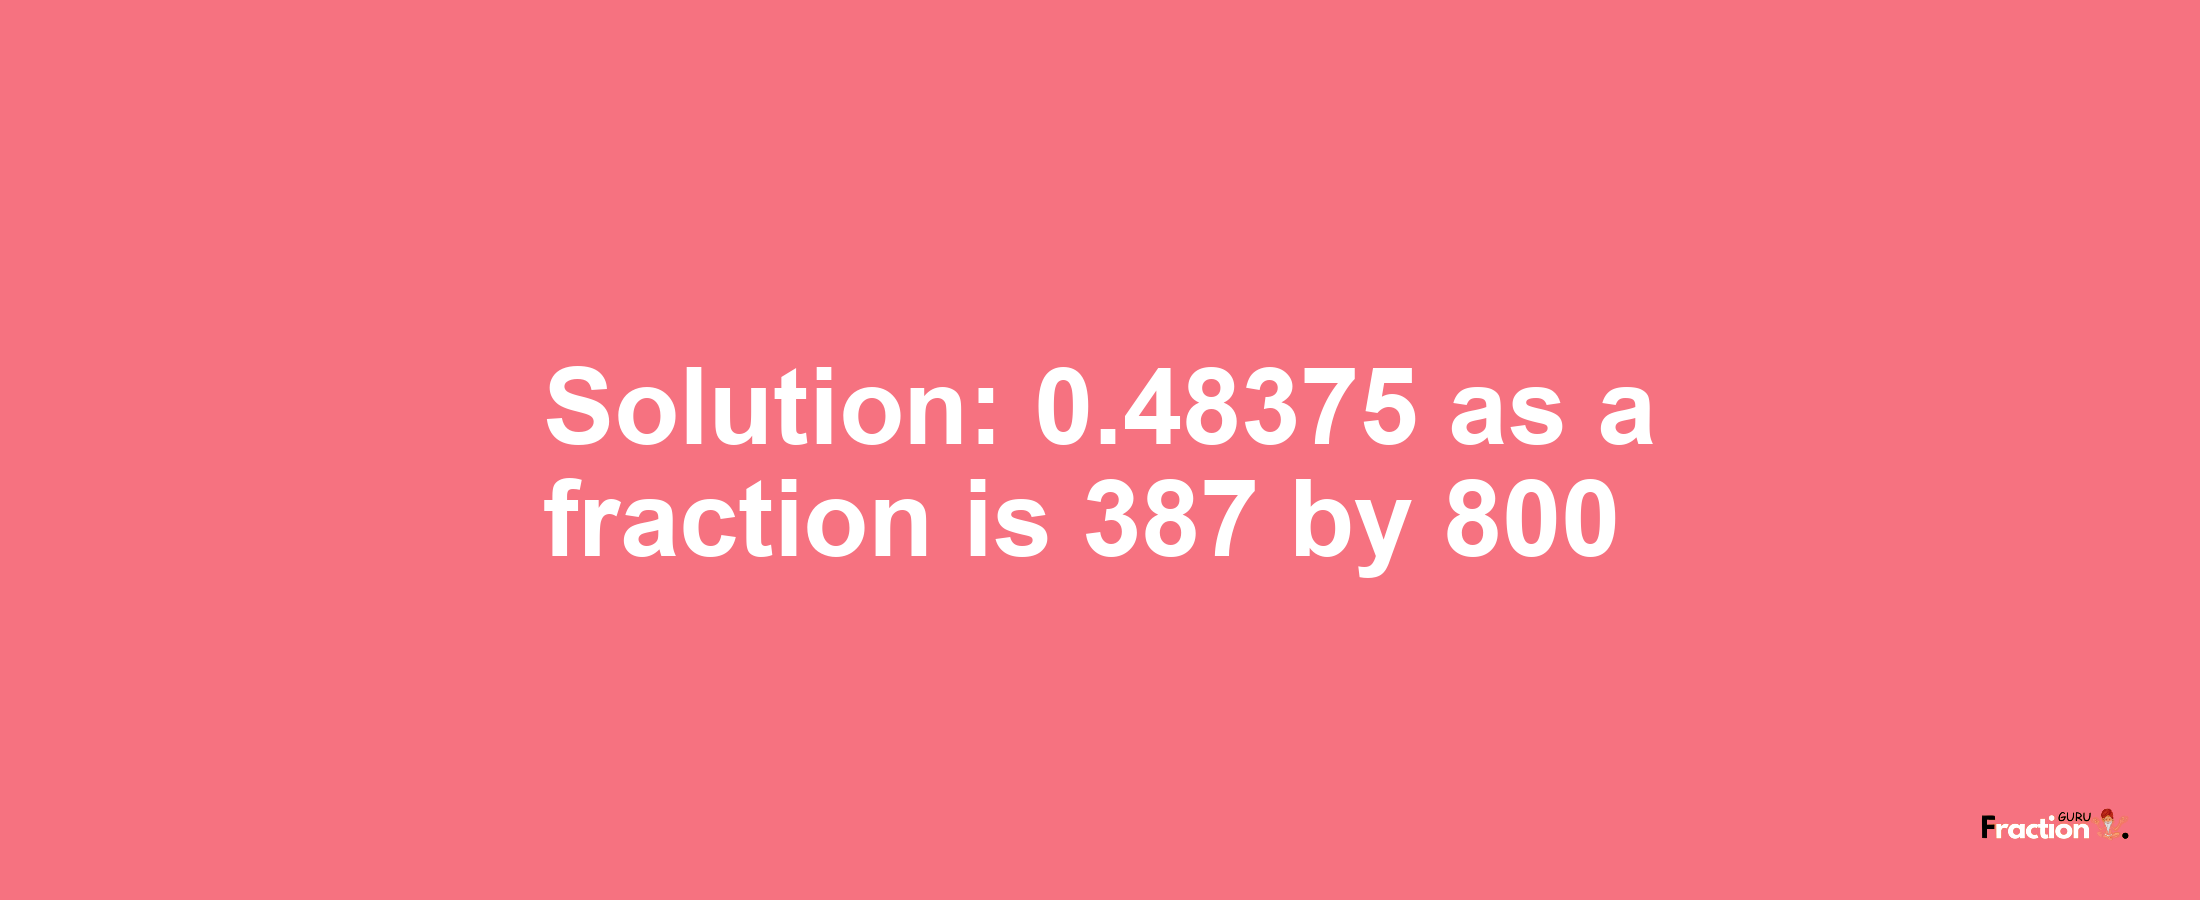 Solution:0.48375 as a fraction is 387/800